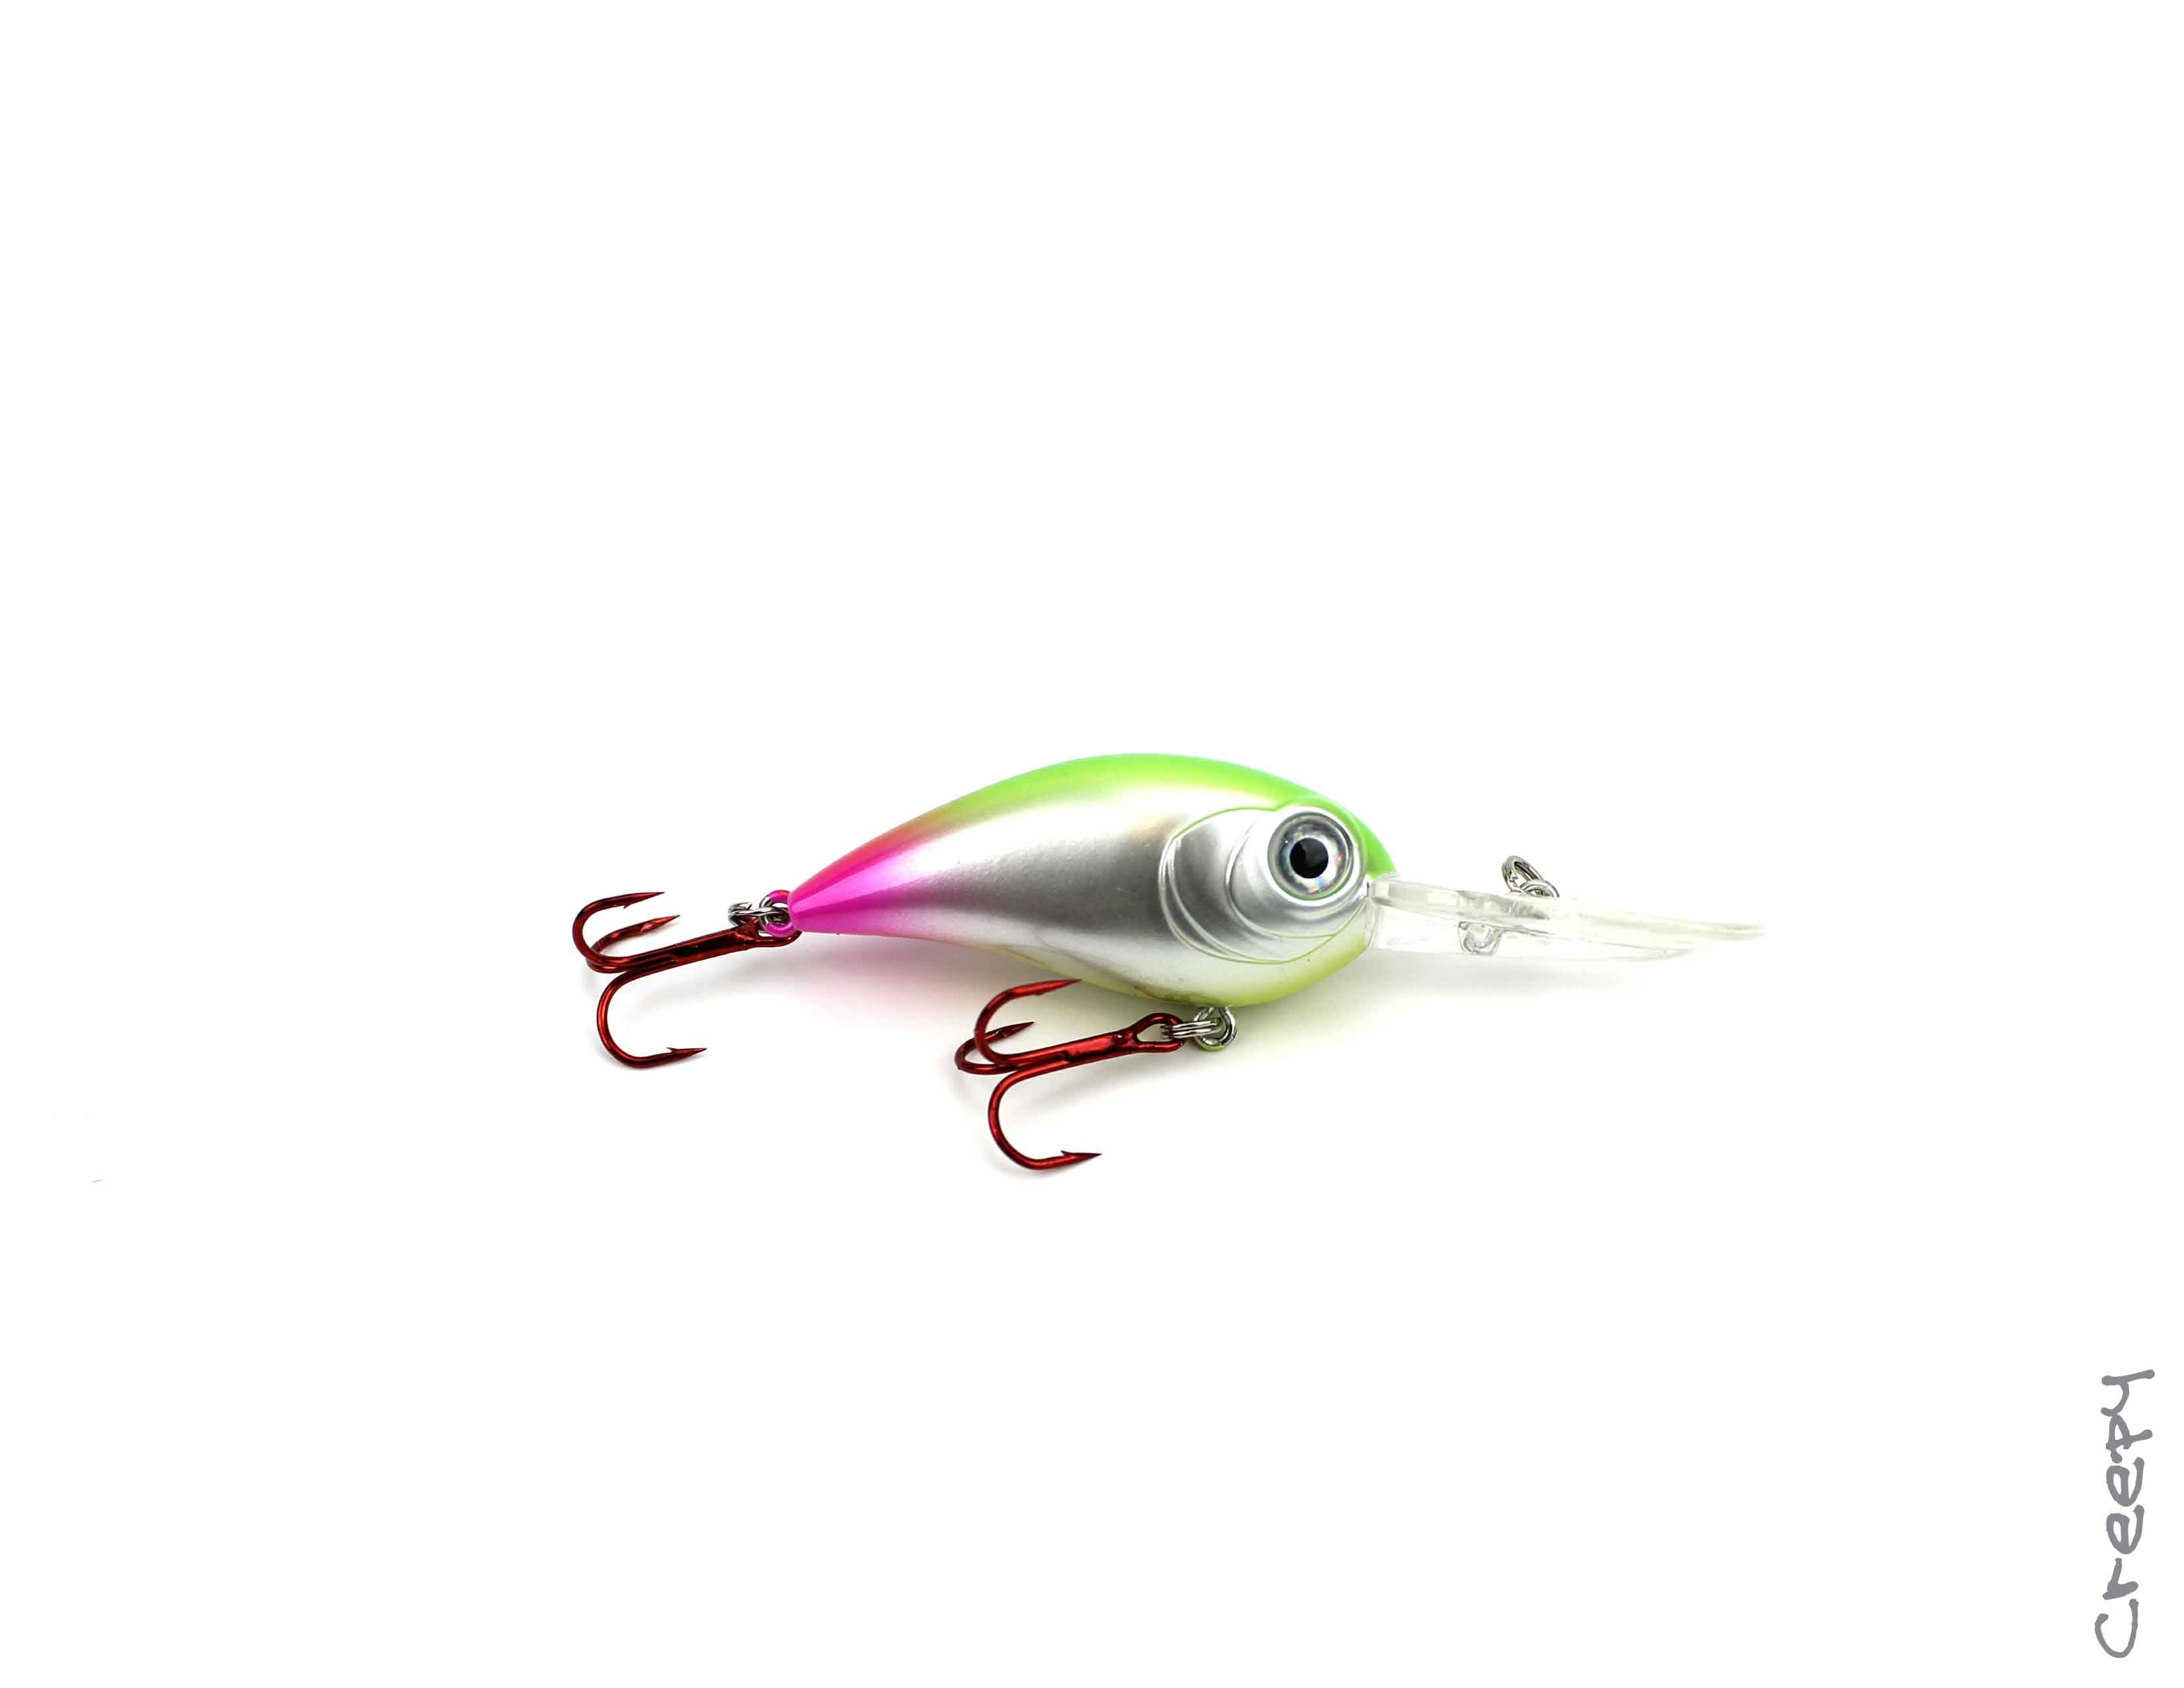 Buster – Kingdom Crappie Lures, LLC